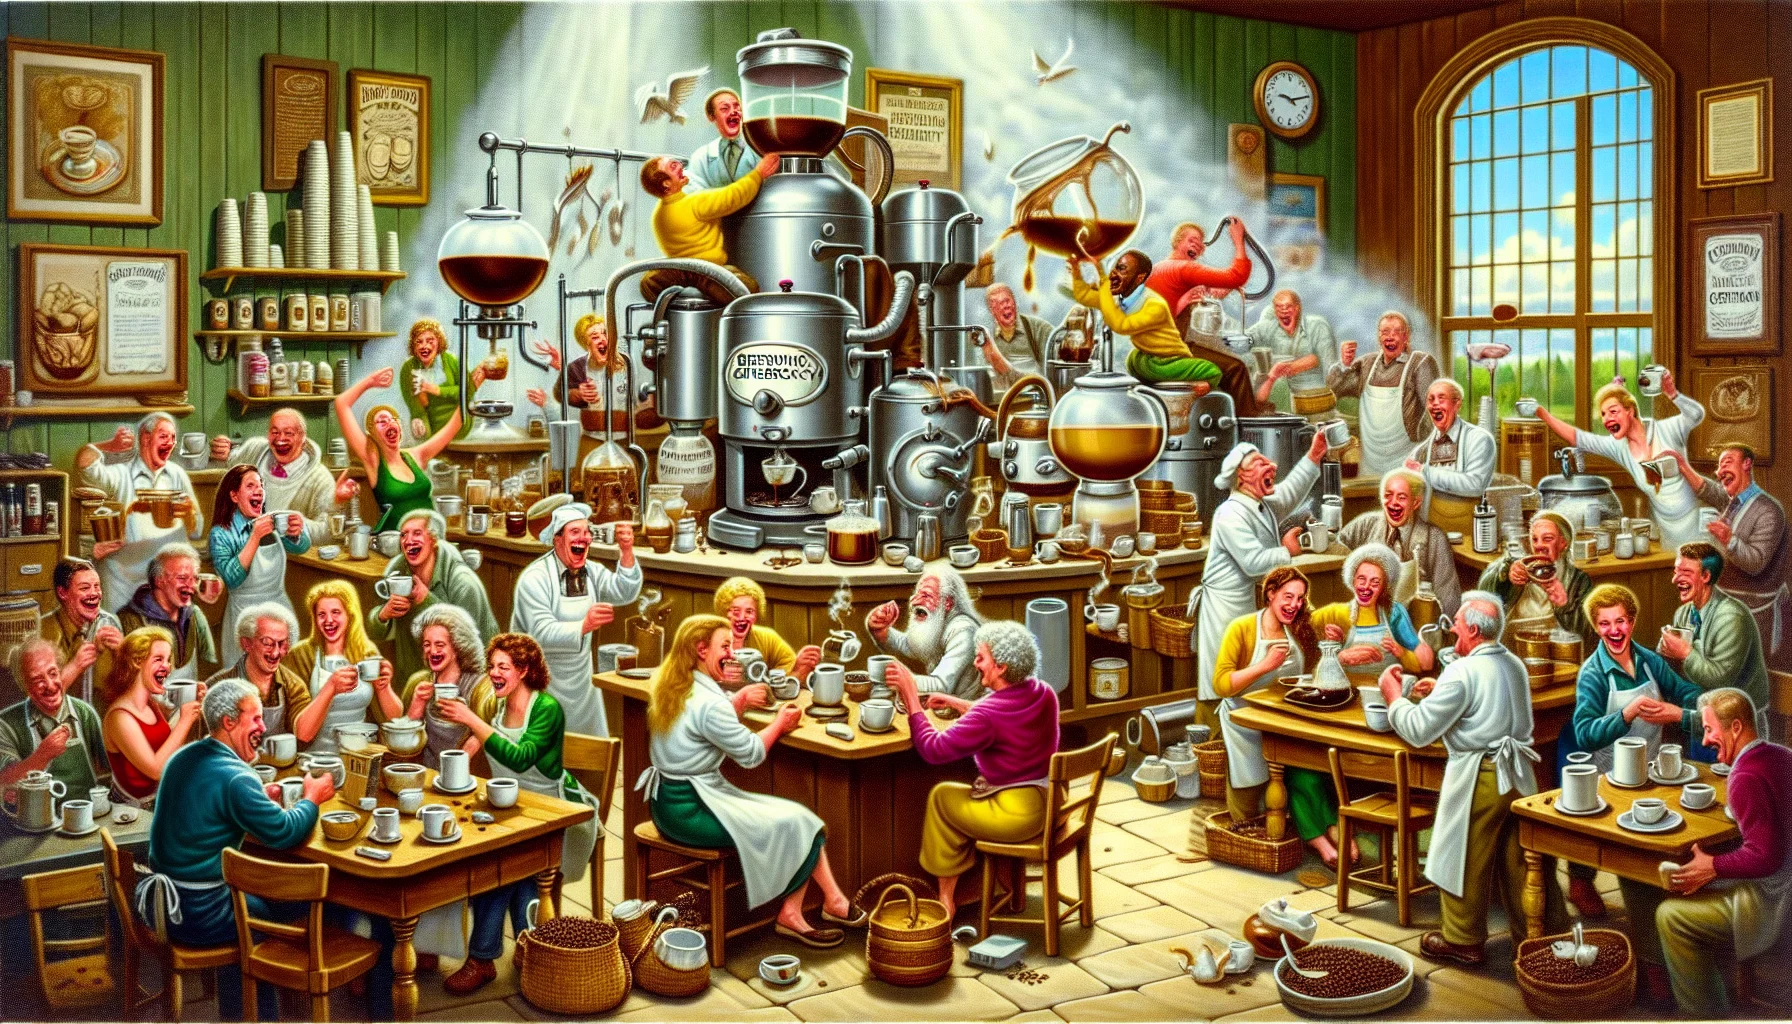 Create a detailed and engaging depiction of a hilarious scenario centered around the concept of 'Brewing Generosity'. Specifically, illustrate the scene to be filled with a hearty and happy ambiance, with individuals eagerly brewing coffee and tea. Place emphasis on the process, showing a variety of brewing methods and equipment in use. Show a diverse range of people, each visibly enthusiastic about the task at hand. The overall atmosphere should be one of camaraderie and generosity, with shared laughter of the people filling the air. Surroundings should be cluttered with a range of coffee and tea products, perhaps artistically displayed to add to the charm of the scene.